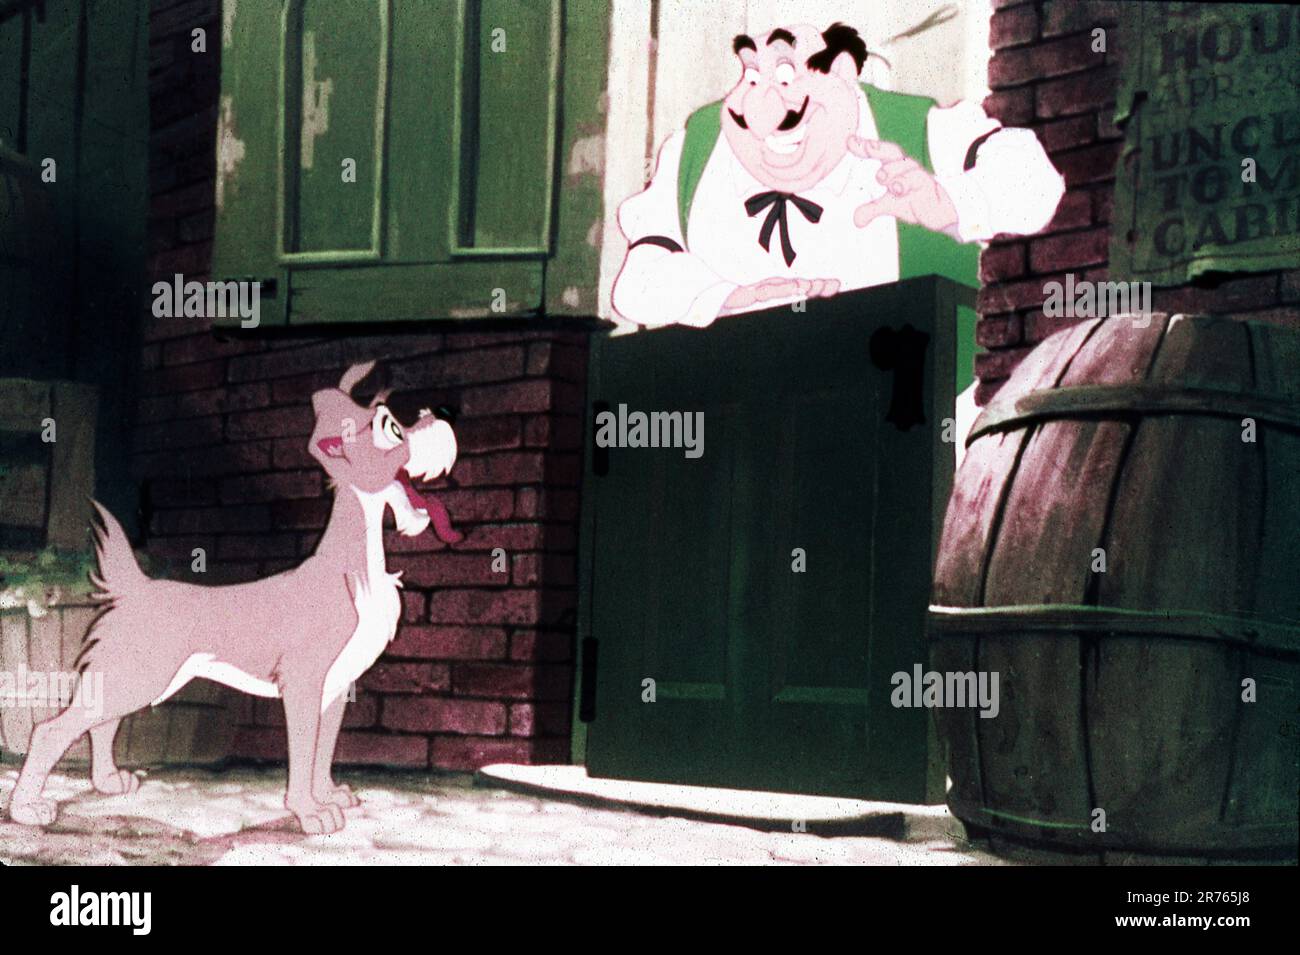 The Tramp and Tony in WALT DISNEY'S LADY AND THE TRAMP 1955 directors CLYDE GERONIMI WILFRED JACKSON and HAMILTON LUSKE from the story by Ward Greene Walt Disney productions / Buena Vista Film Distribution Company Stock Photo